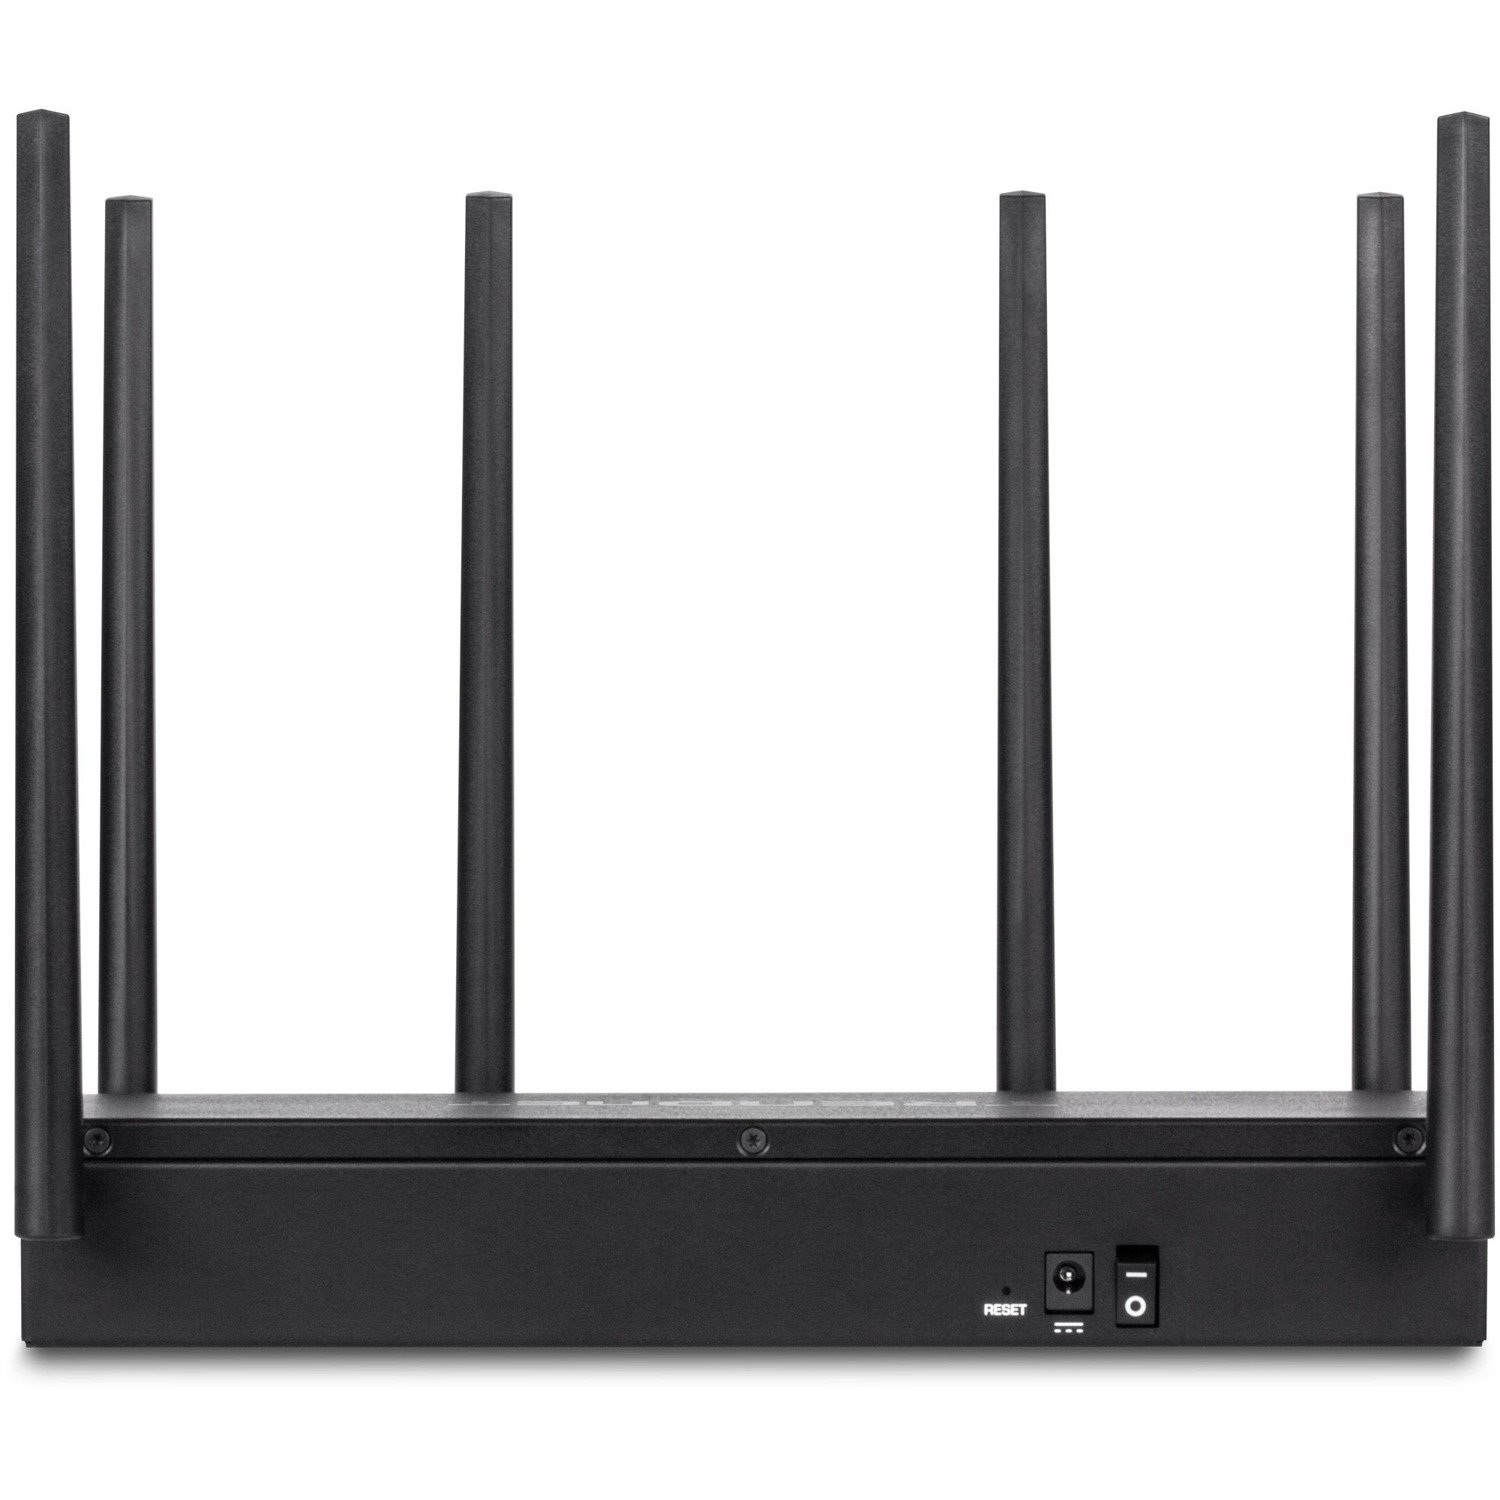 TRENDnet AC3000 Tri-Band Wireless Gigabit Dual-WAN VPN SMB Router, MU-MIMO, Wave 2,Internet Router, Whole Office-Home Wifi, Pre-Encrypted Wireless, QoS,Inter-VLAN Routing, Black, TEW-829DRU